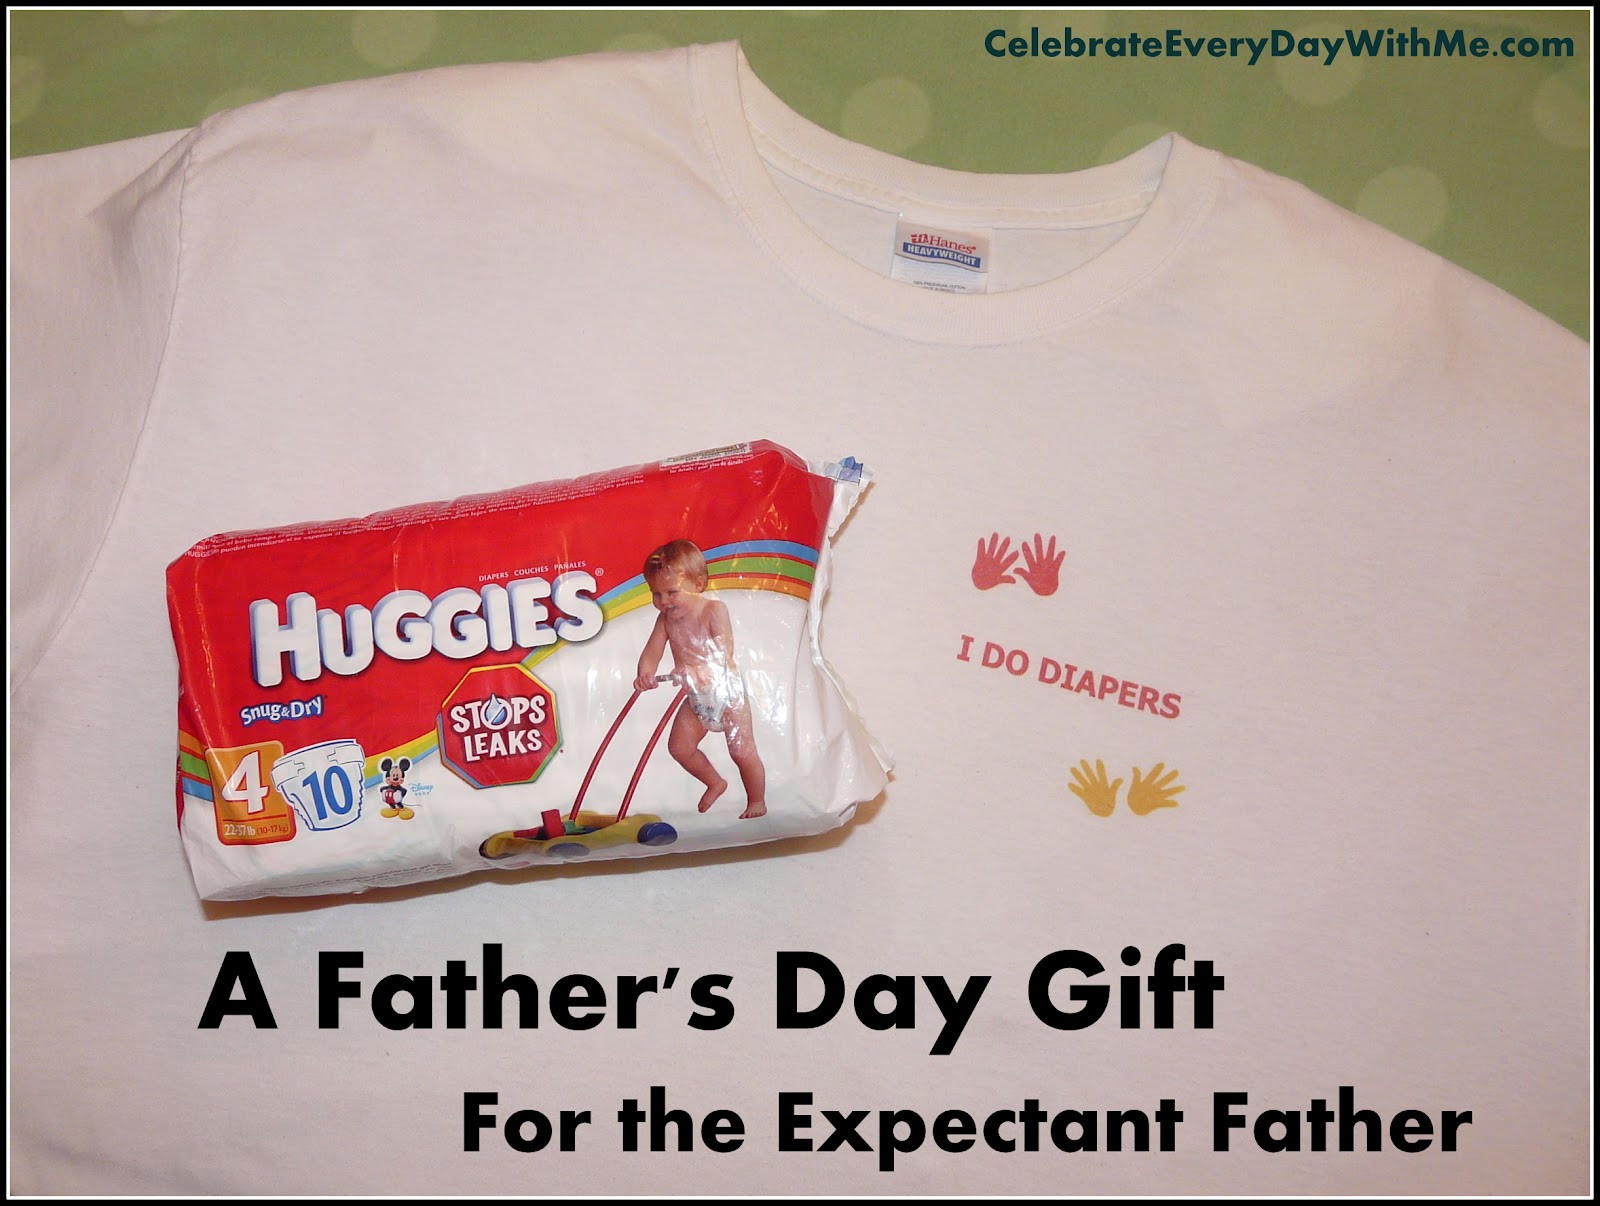 Gift Ideas For Expecting Fathers
 A Father’s Day Gift for the Expectant Father